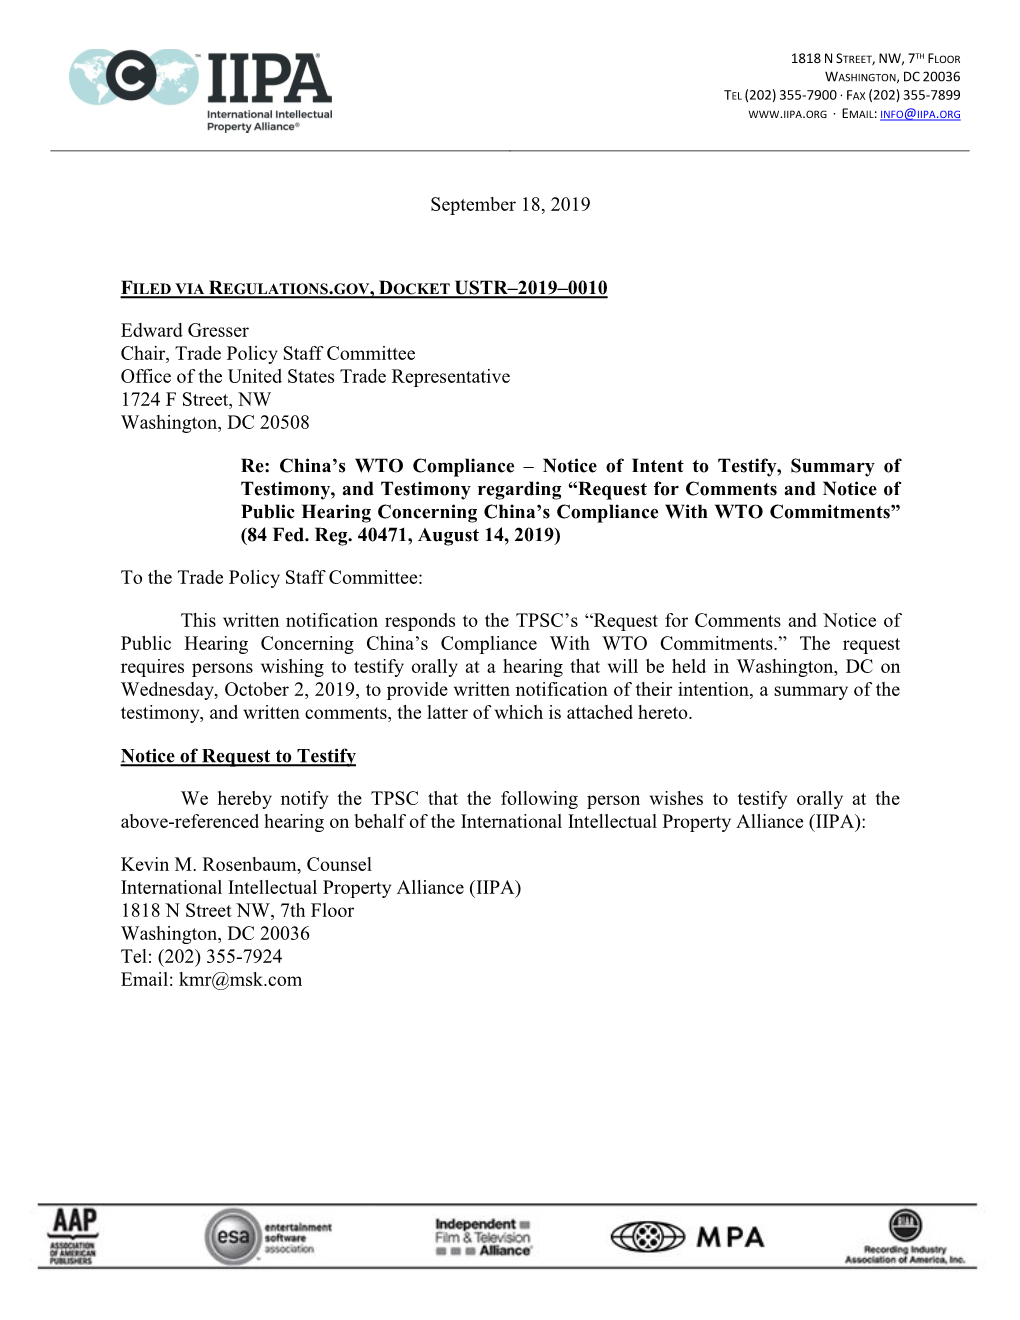 IIPA Notice of Intent to Testify, Summary of Testimony and Comments on China's Compliance With